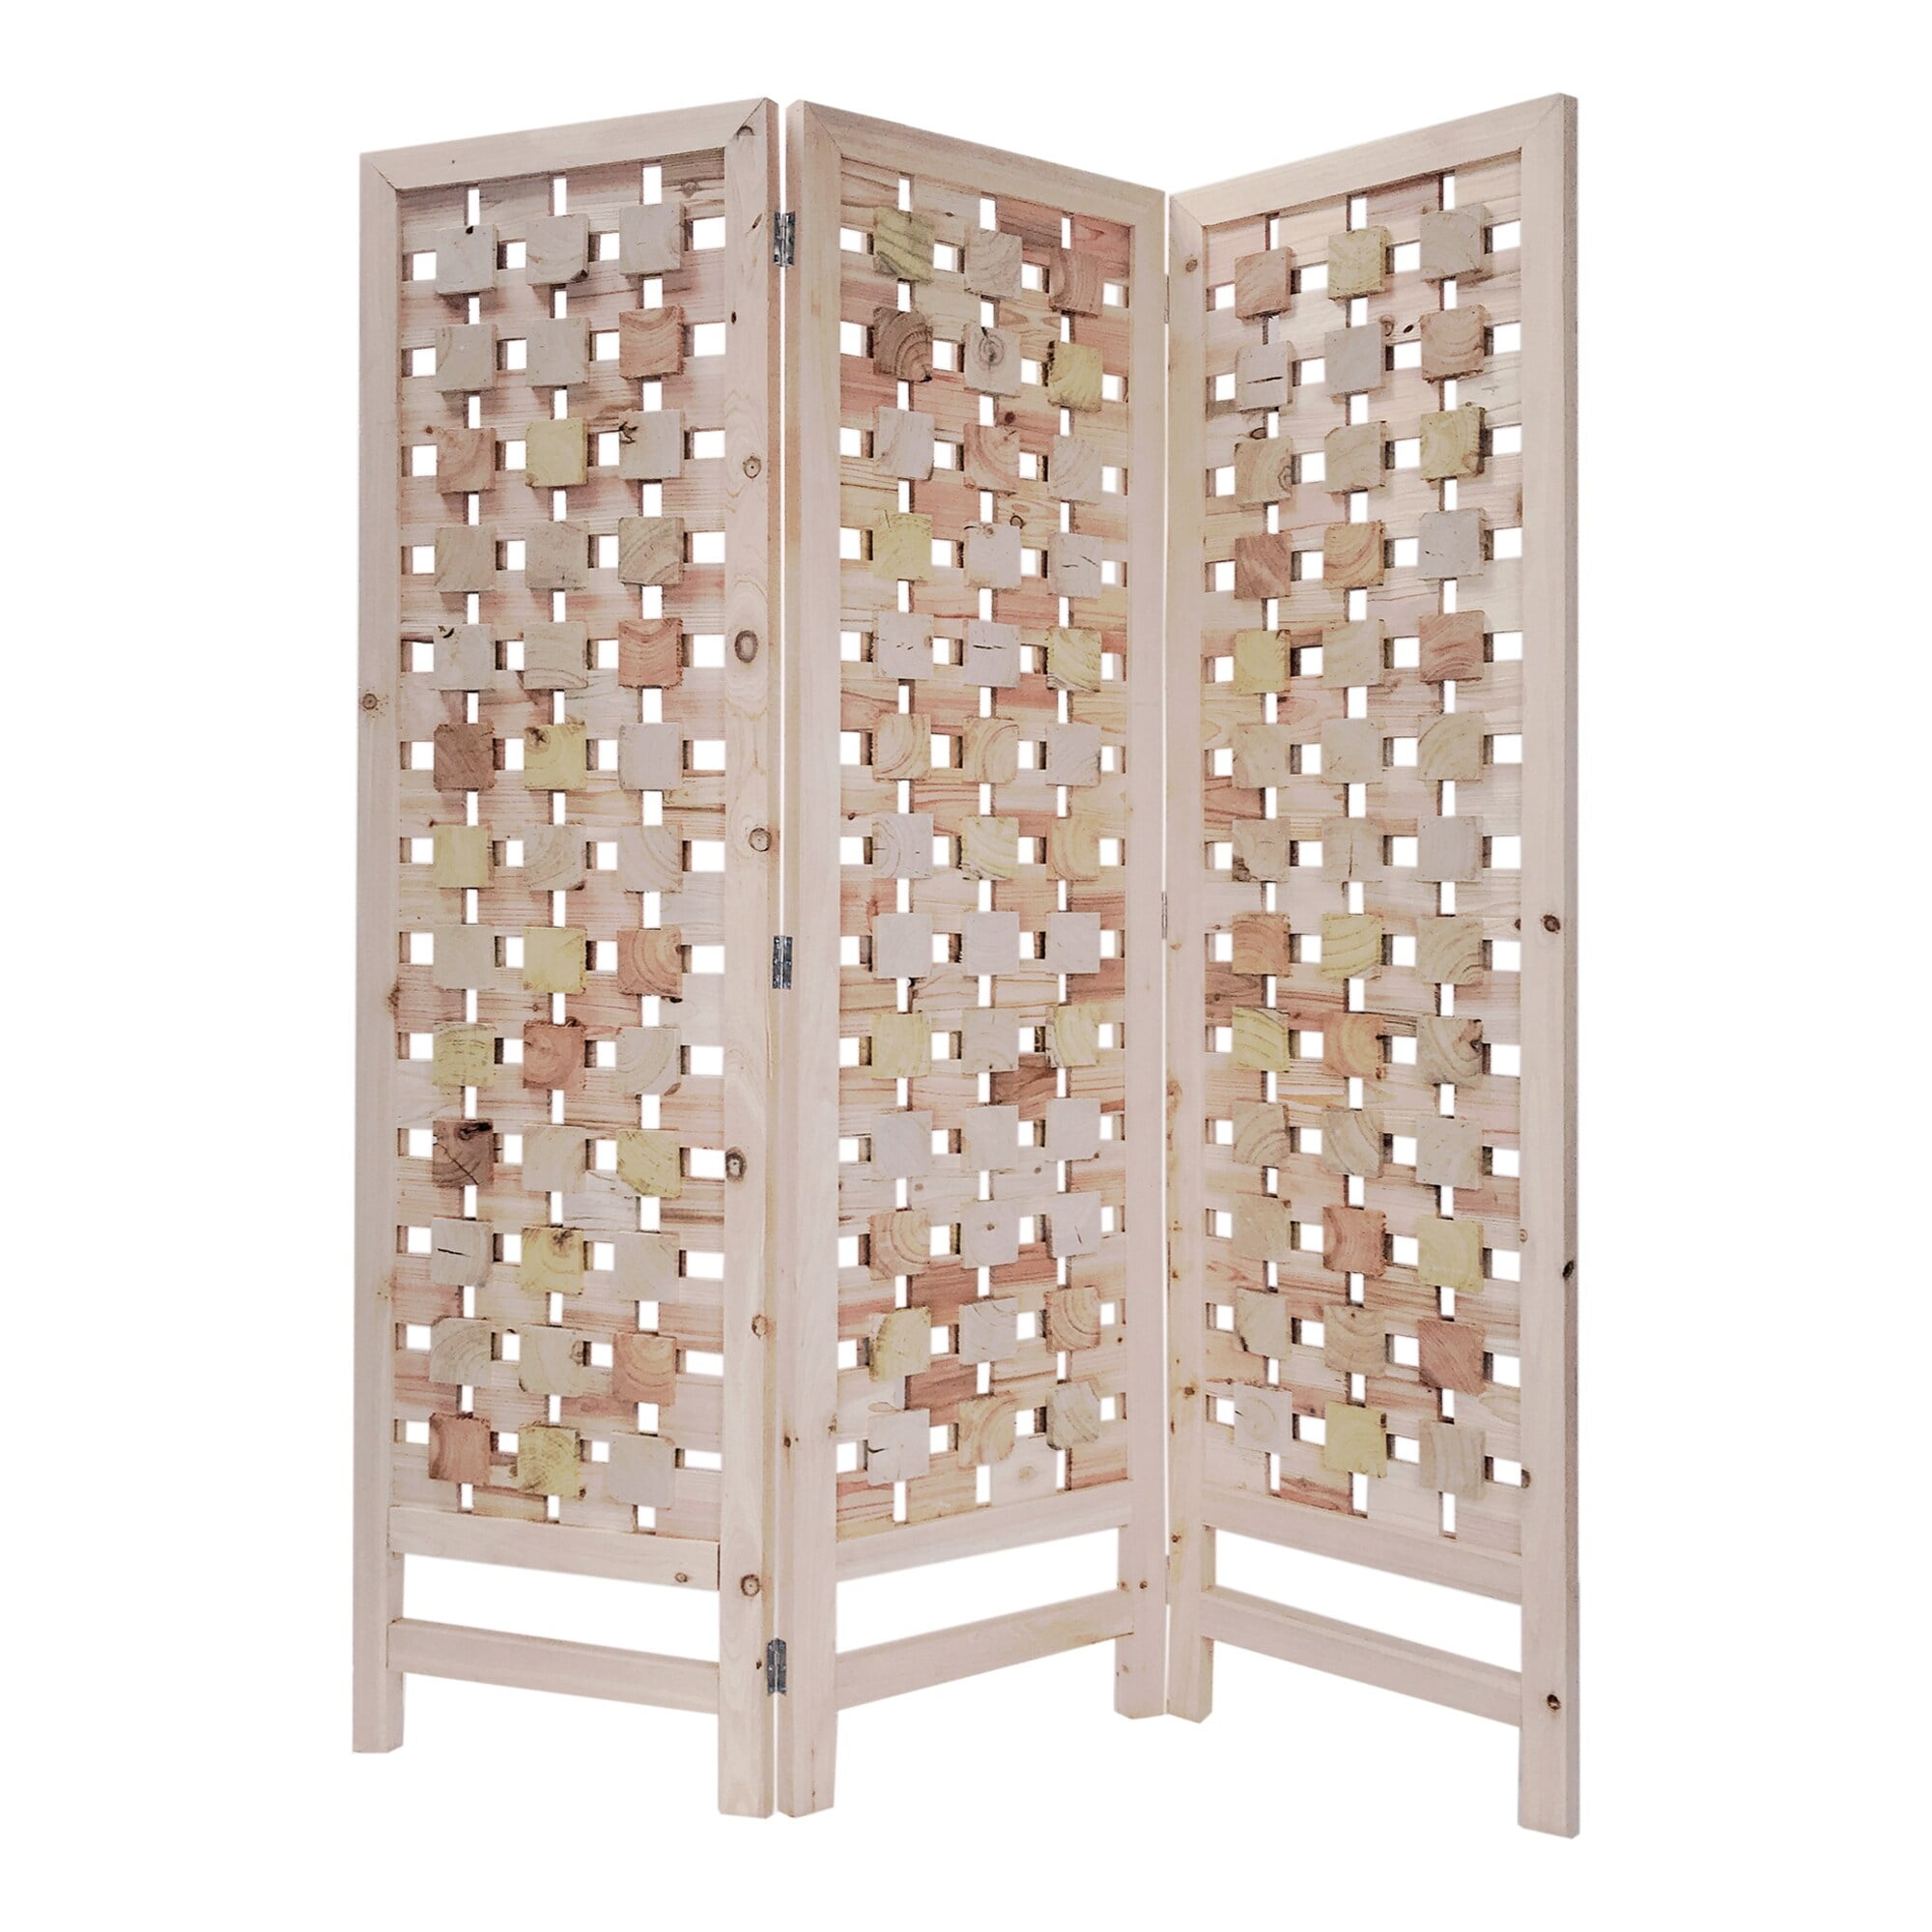 Bm228620 3 Panel Wooden Screen With Interspersed Square Pattern, Cream